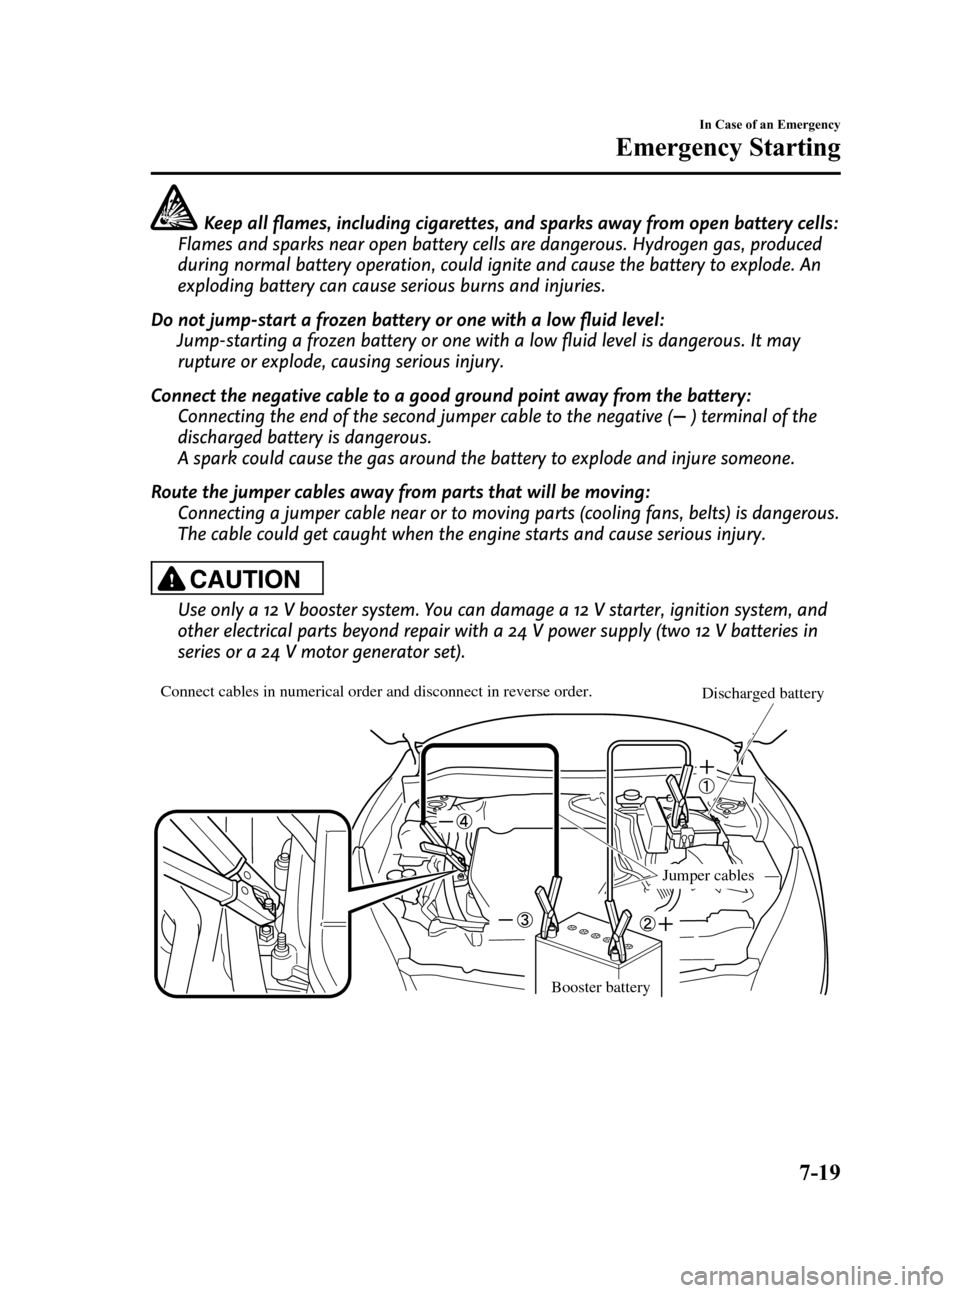 MAZDA MODEL 3 HATCHBACK 2010  Owners Manual (in English) Black plate (357,1)
Keep all flames, including cigarettes, and sparks away from open battery cells:
Flames and sparks near open battery cells are dangerous. Hydrogen gas, produced
during normal batter